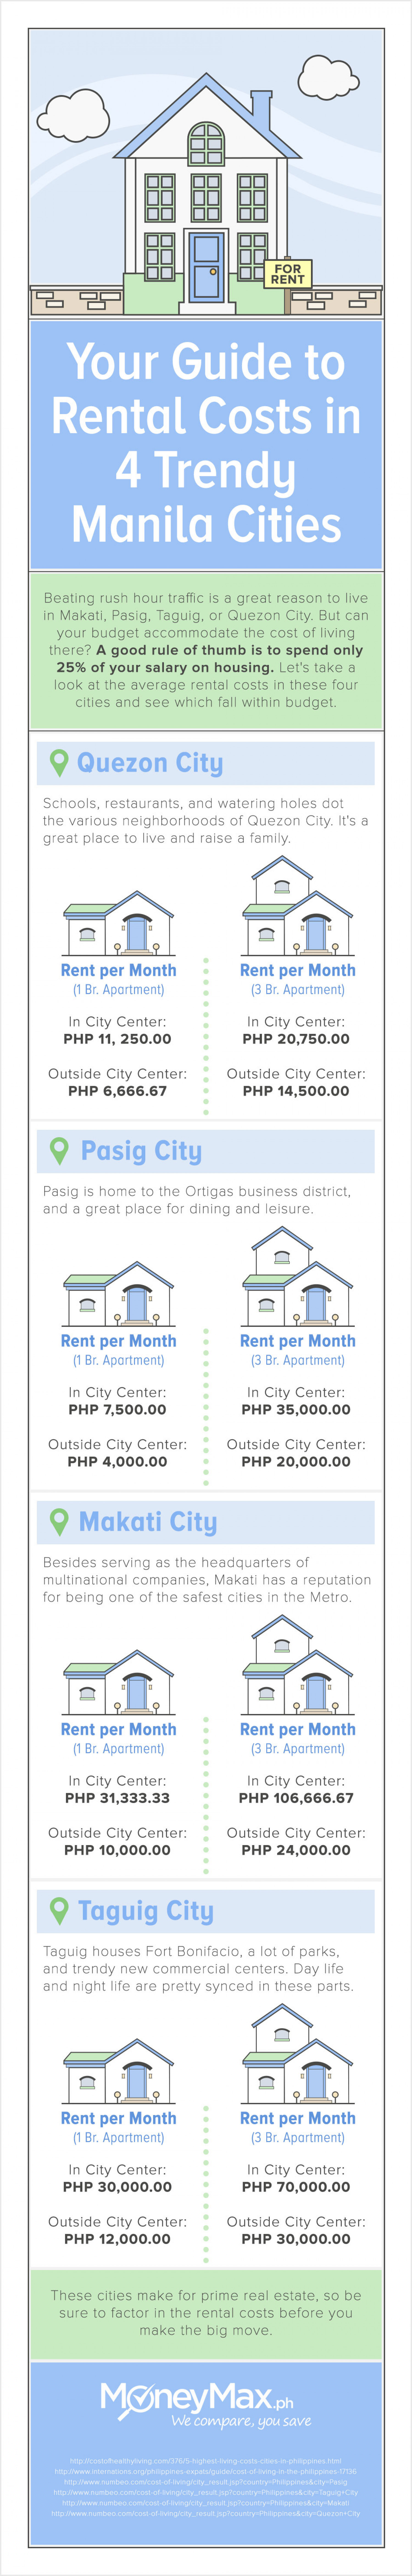 Your guide to rental costs in 4 trendy Metro Manila cities Infographic